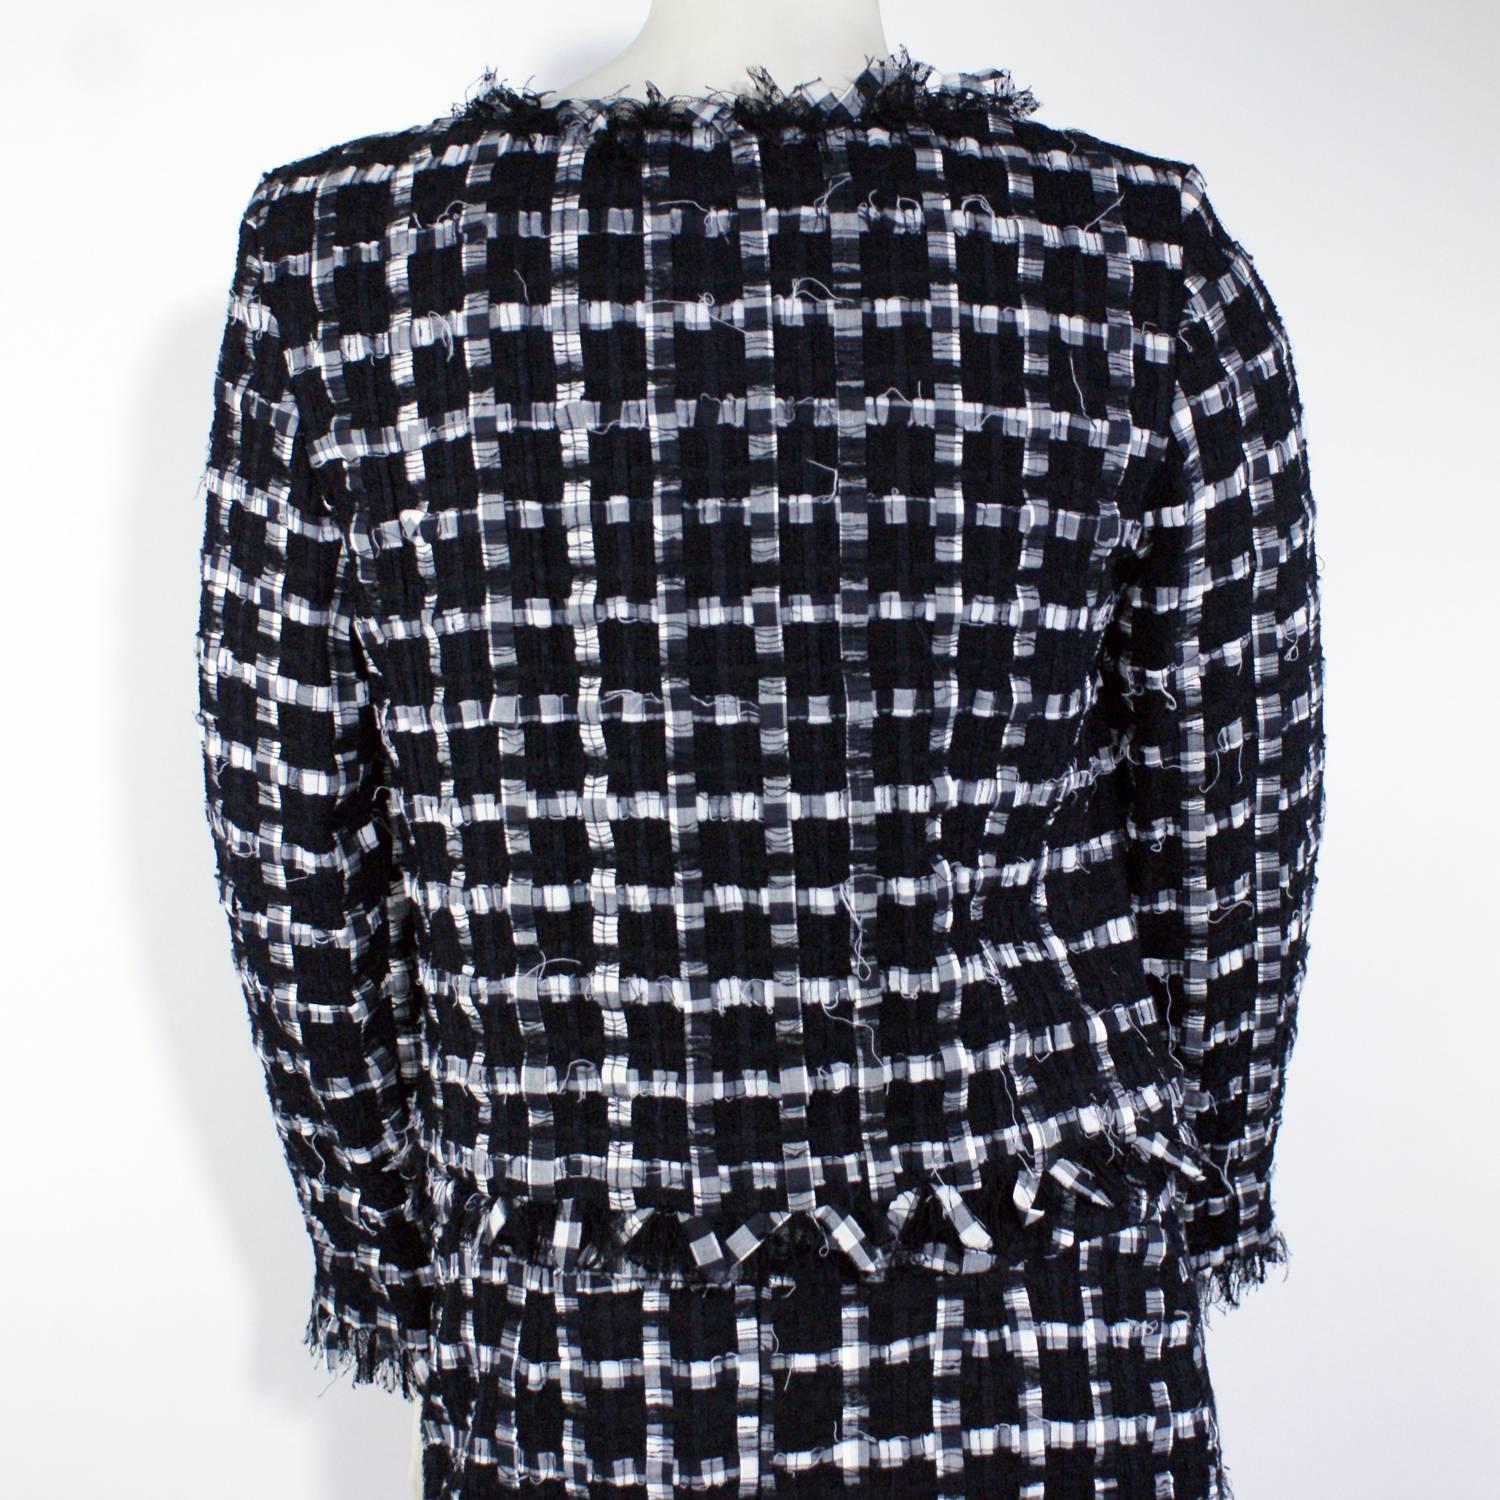 Chanel Black and White Ribbon 2 Piece Skirt Suit Set 1